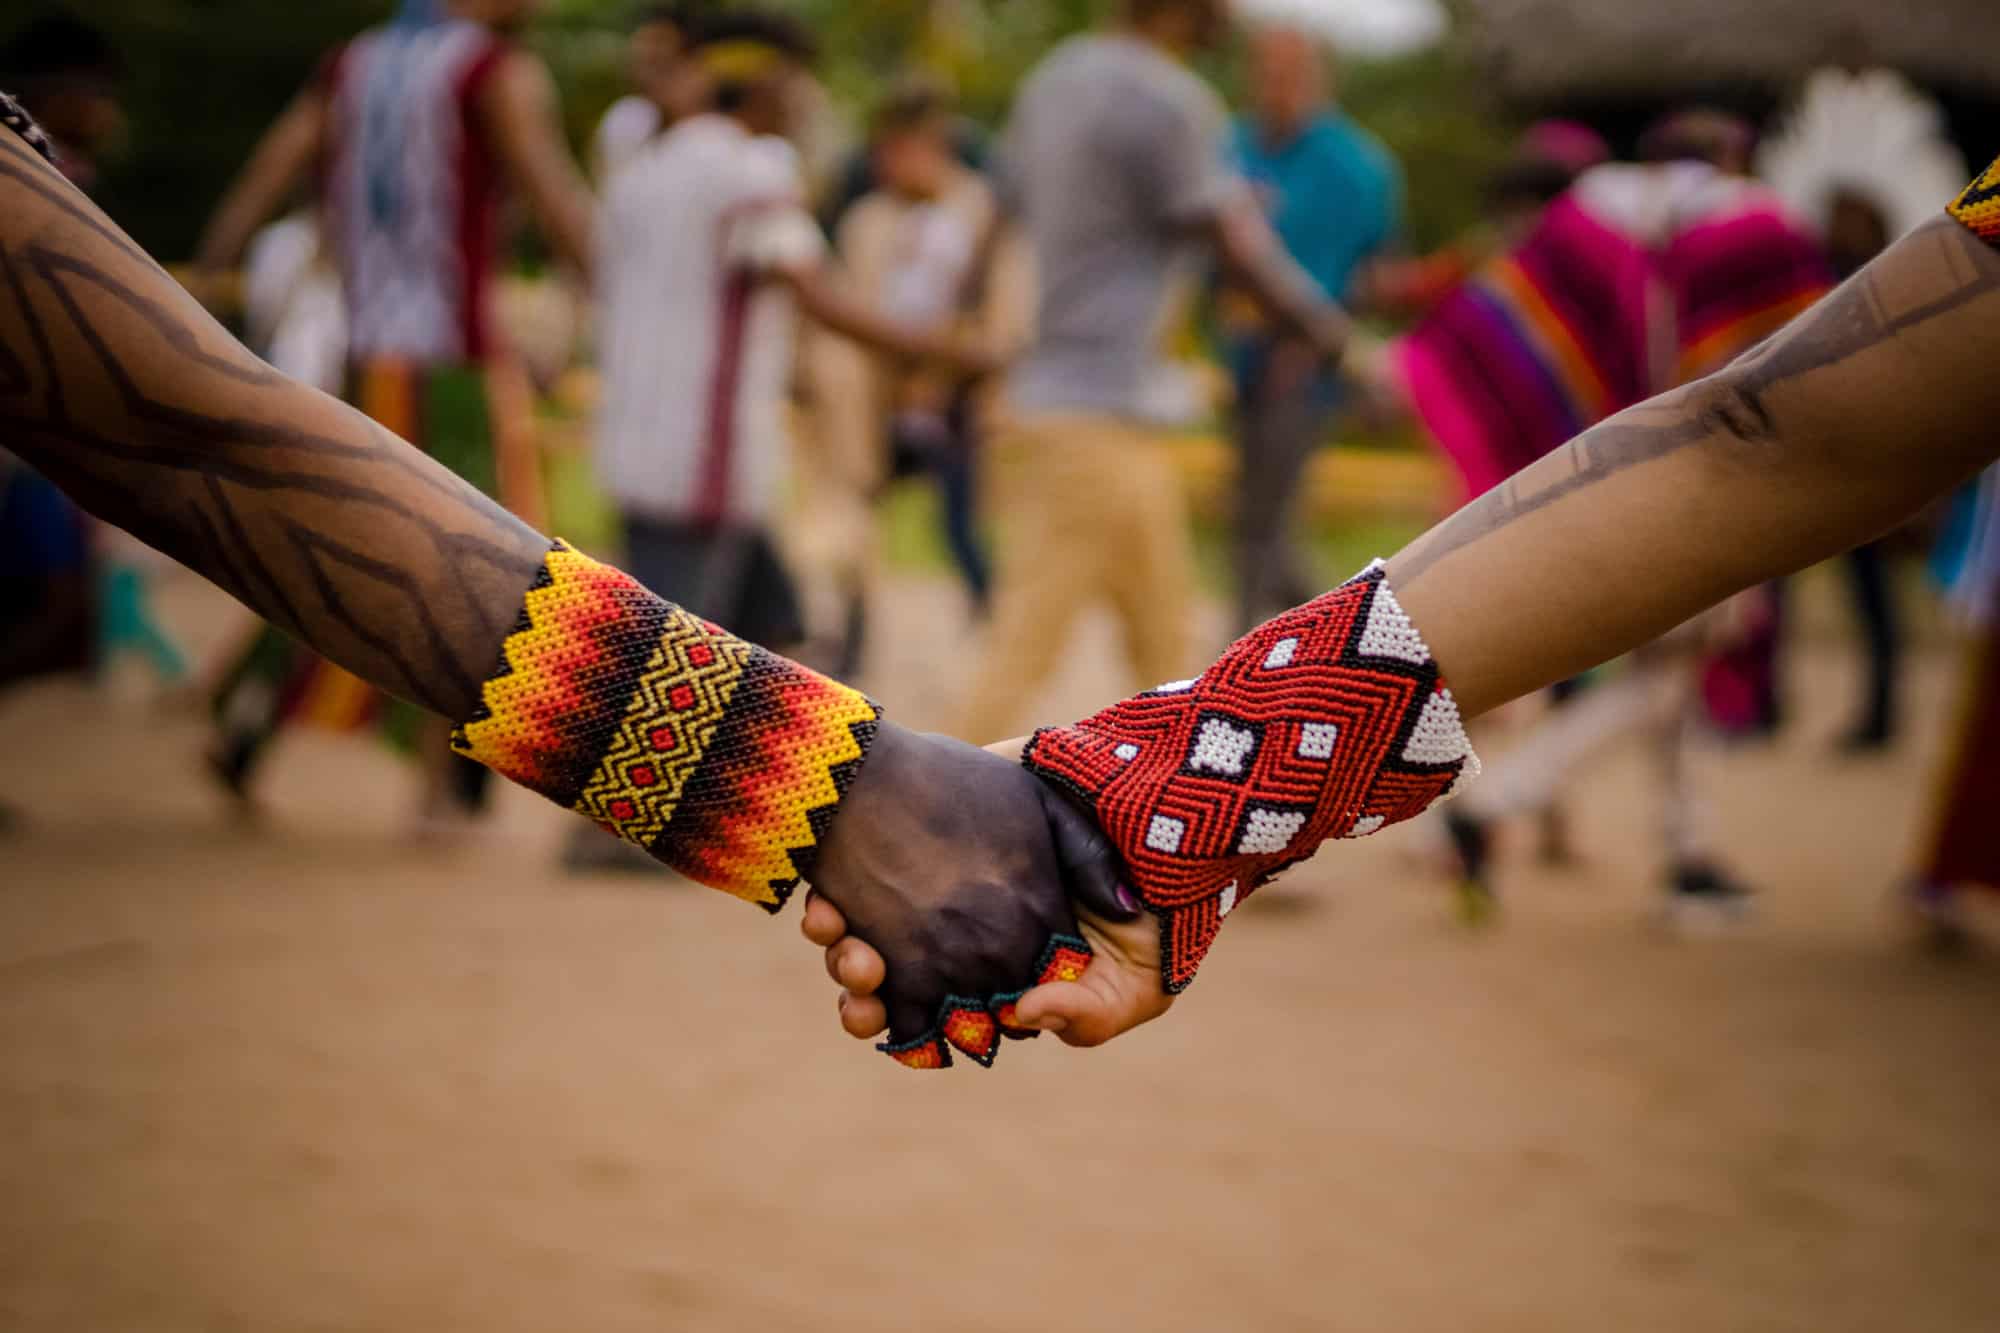 Sao Paulo, SP, Brazil - April 20 2023: People holding hands wearing traditional colorful bracelets of indigenous peoples.